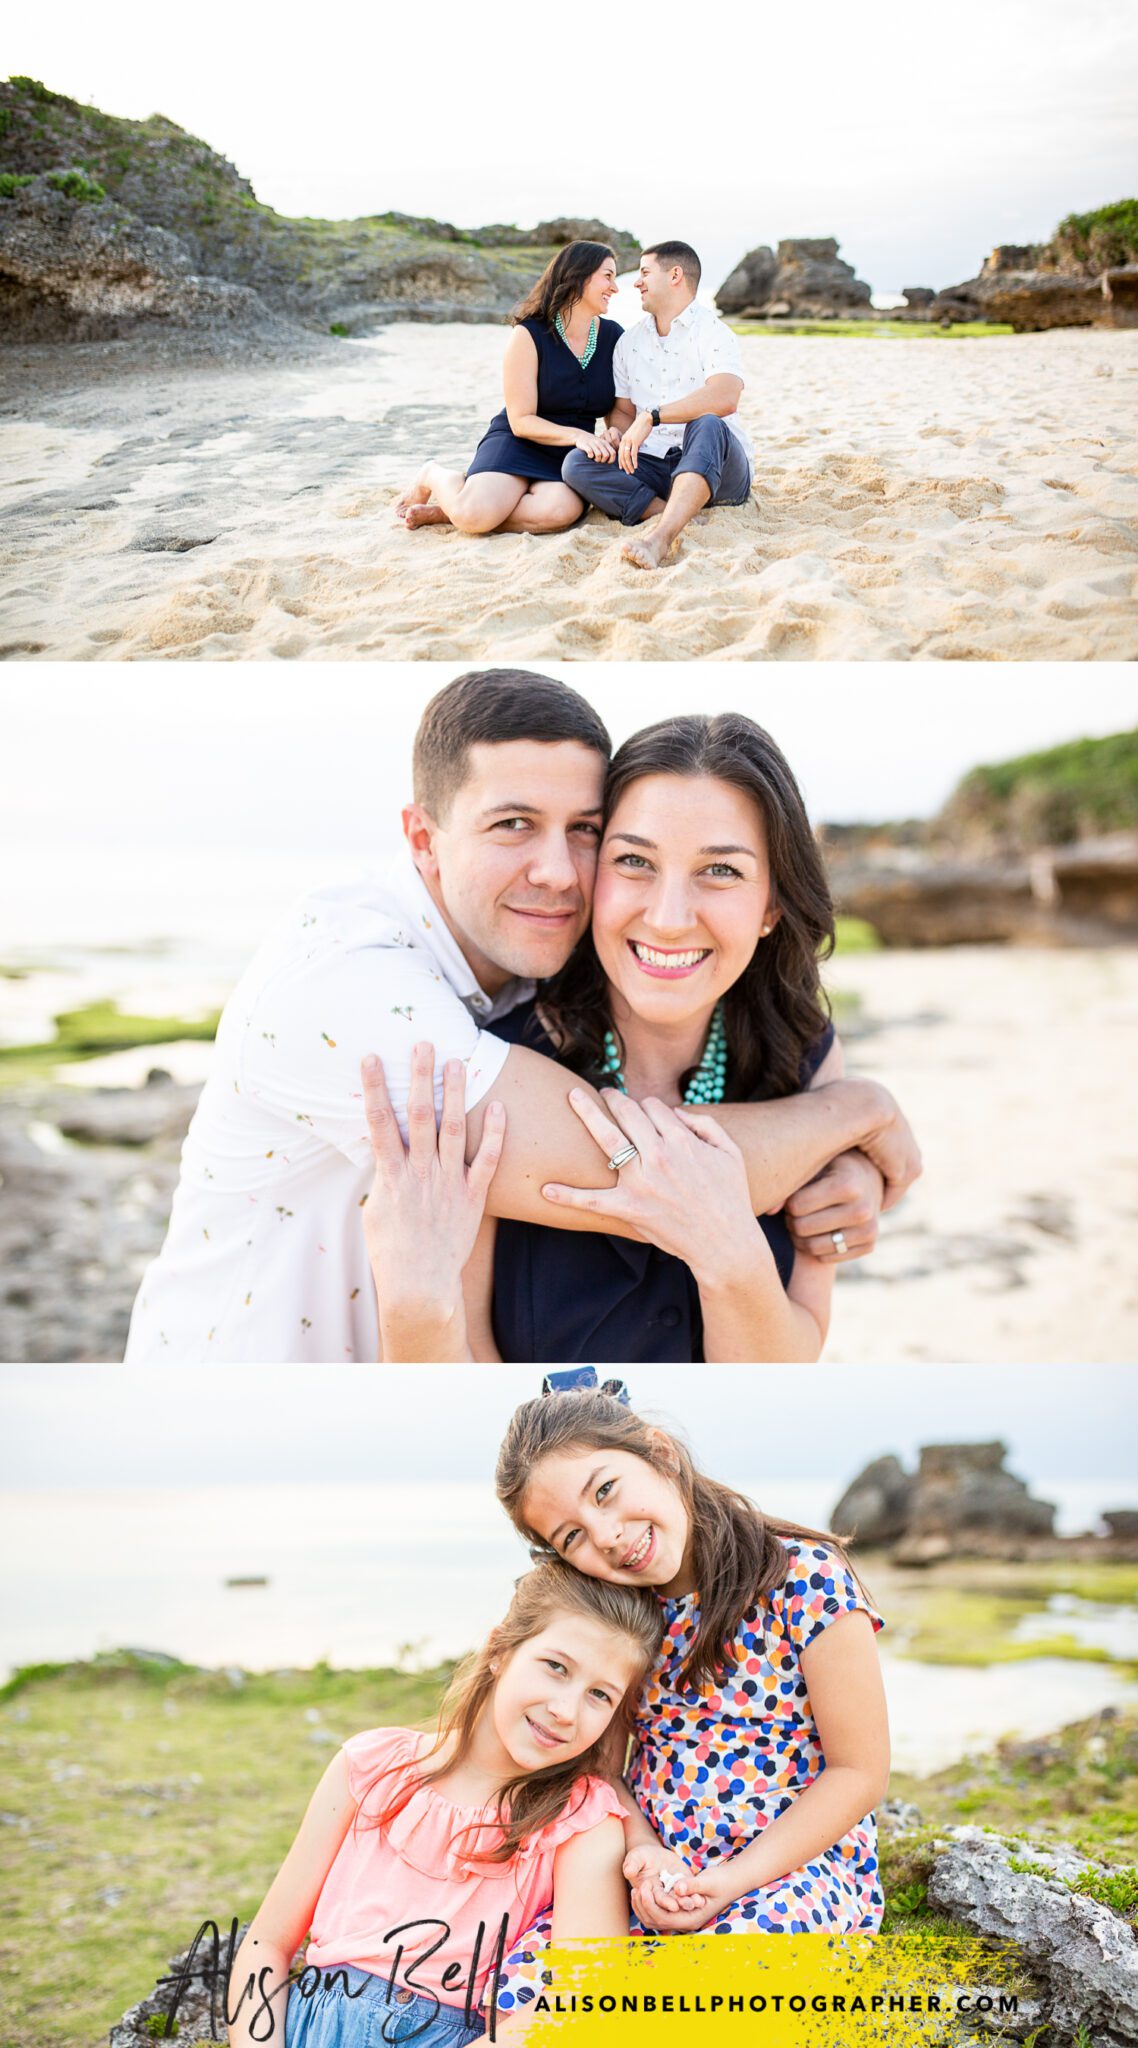 North short photographers hawaii - family beach photo session by alison bell, photographer